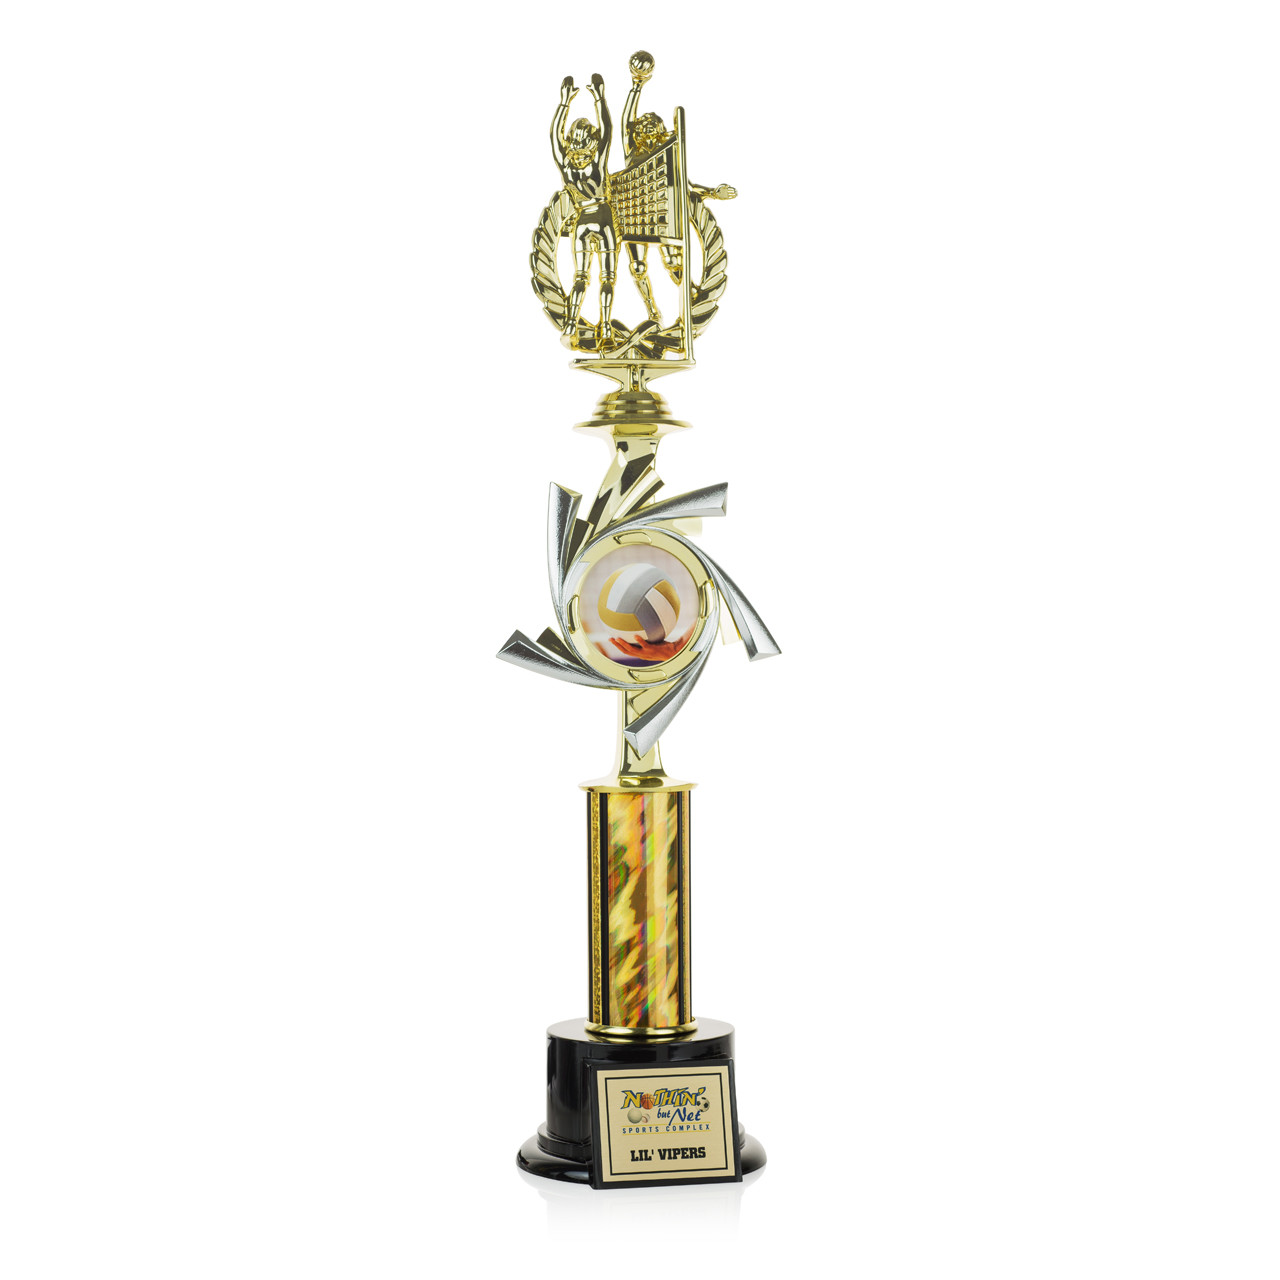 Shop Awards and Gifts 3 x 2-3/4 Inches White Plastic Trophy Base